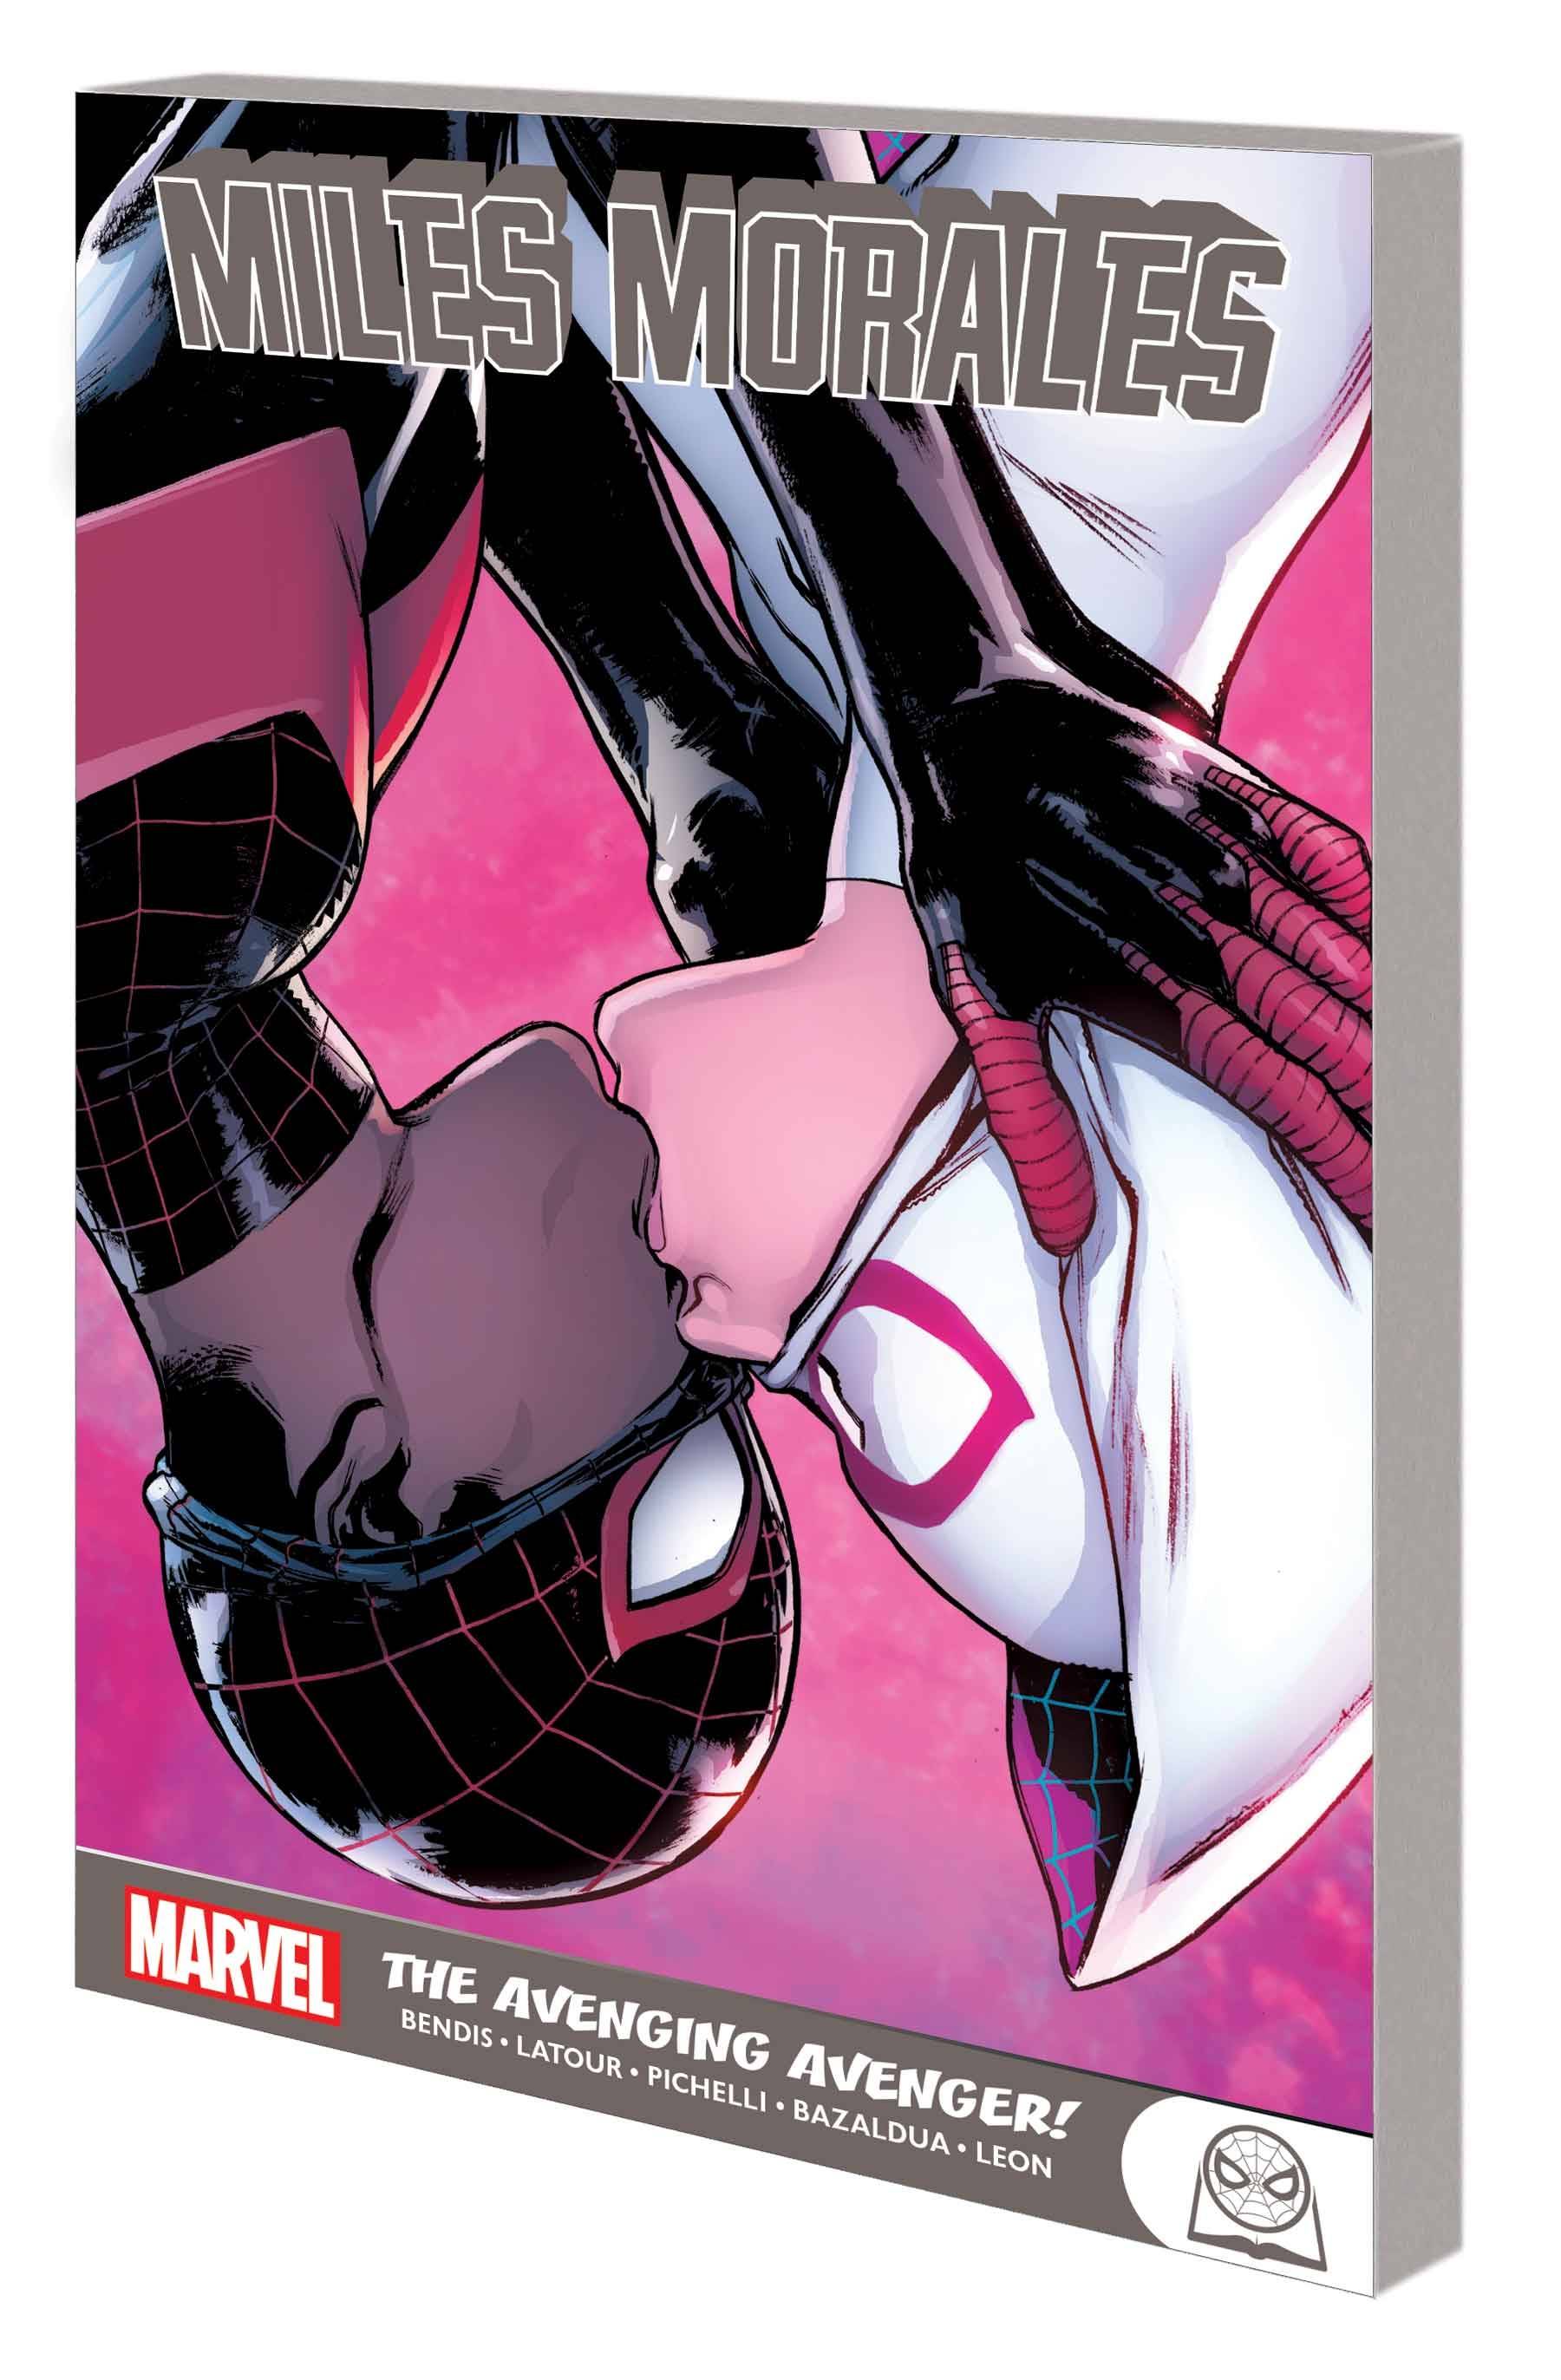 Miles Morales by Bendis vol 2: The Avenging Avenger s/c